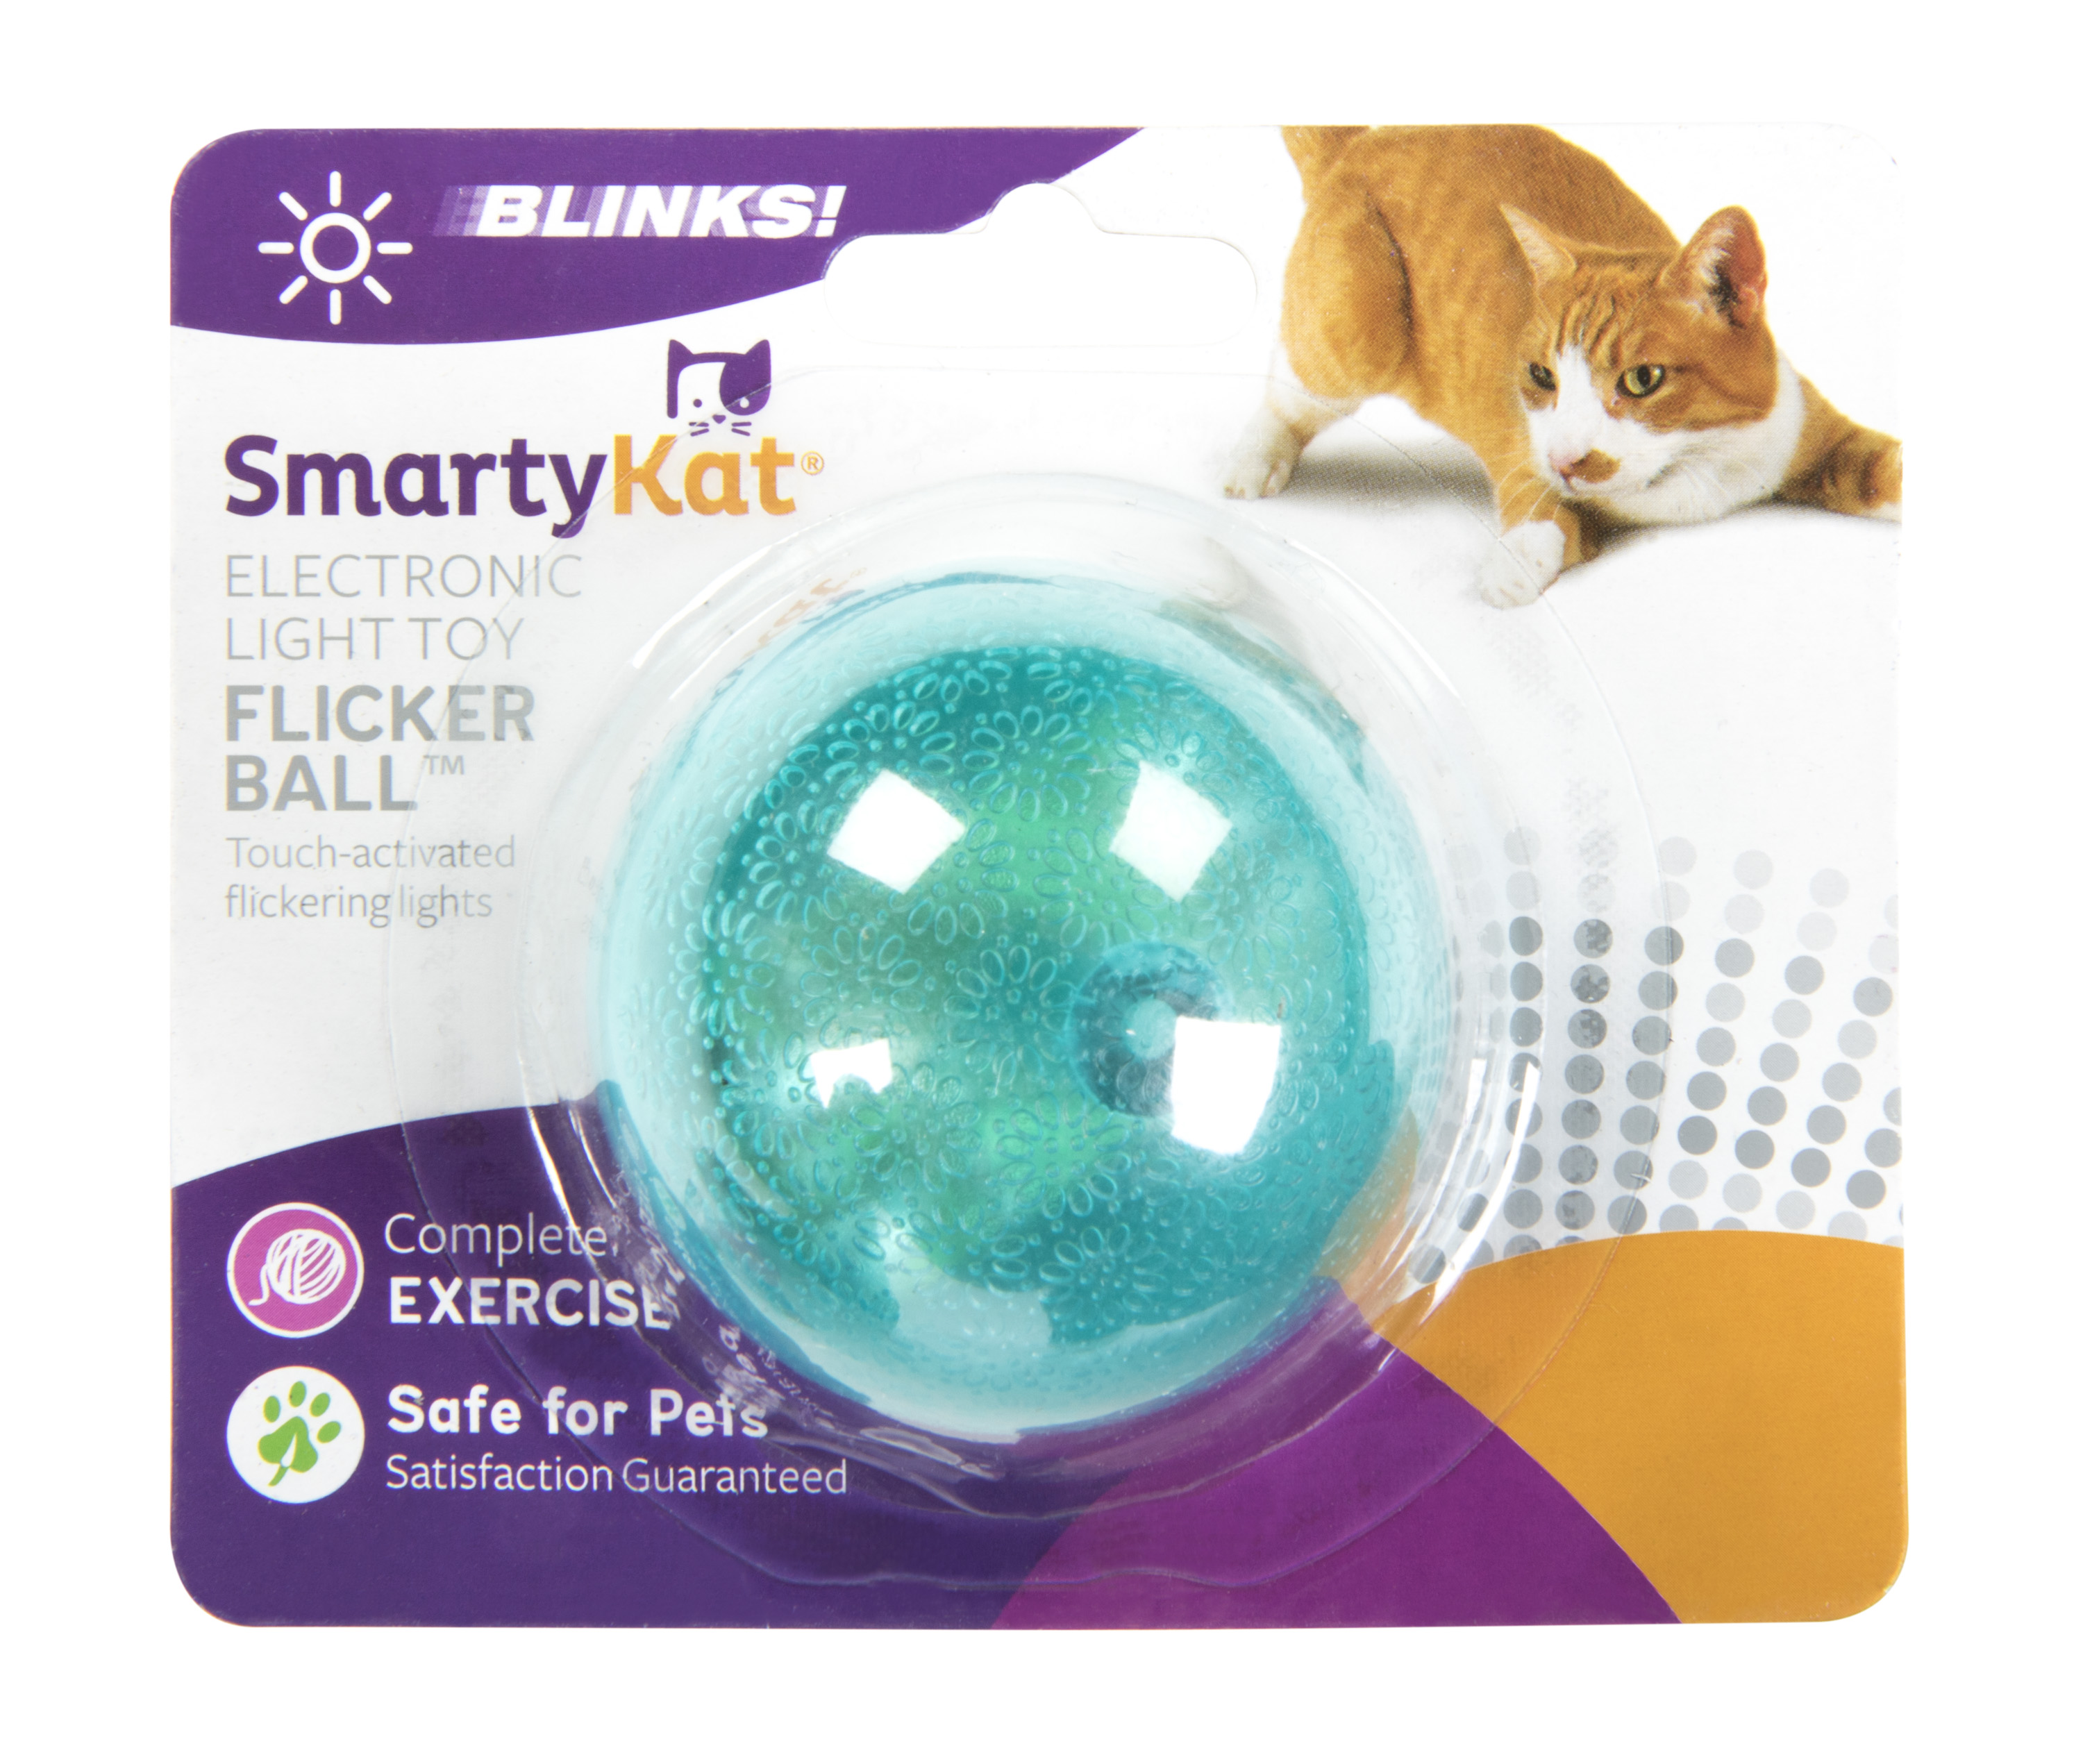 SmartyKat FlickerBall Electronic Light Cat Toy - image 1 of 12